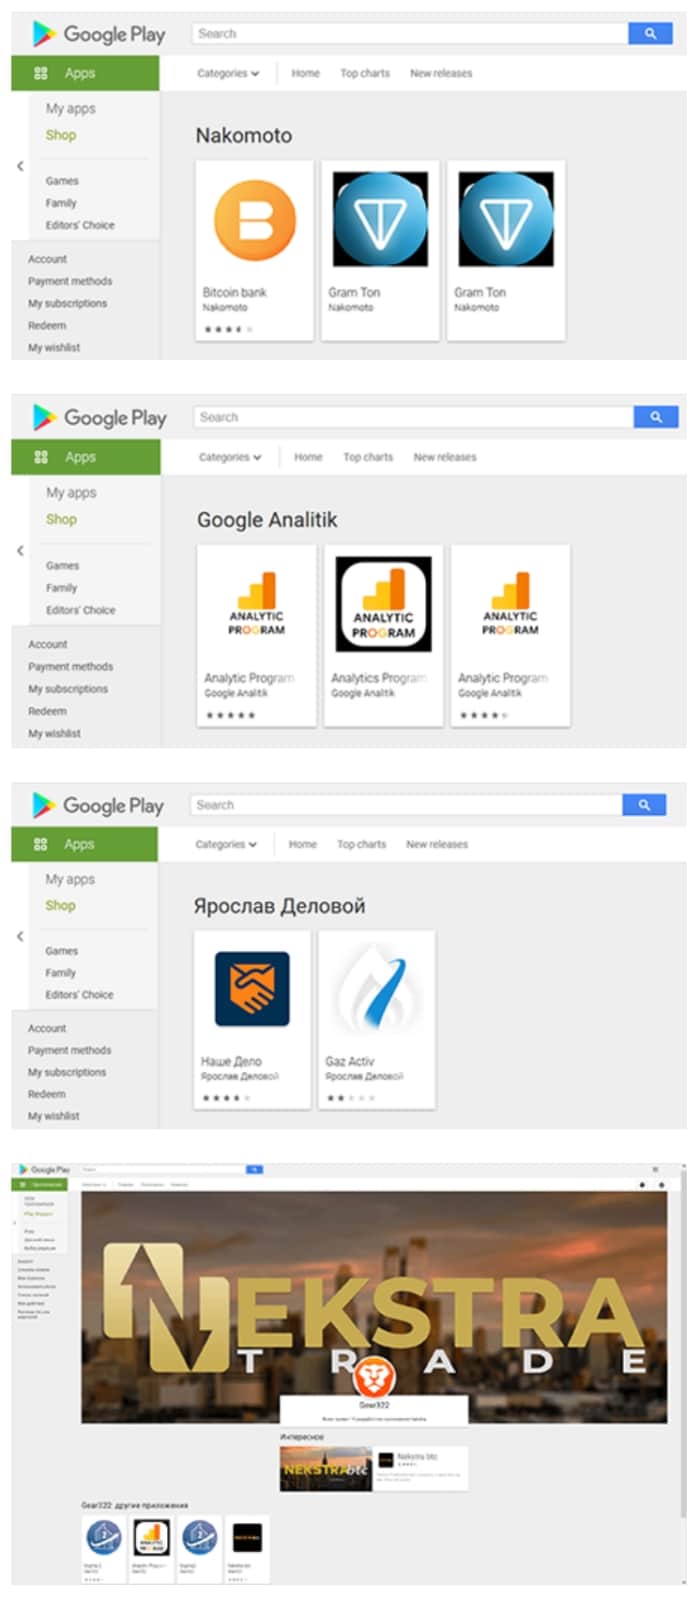 List of dangerous applications on the Google Play Store